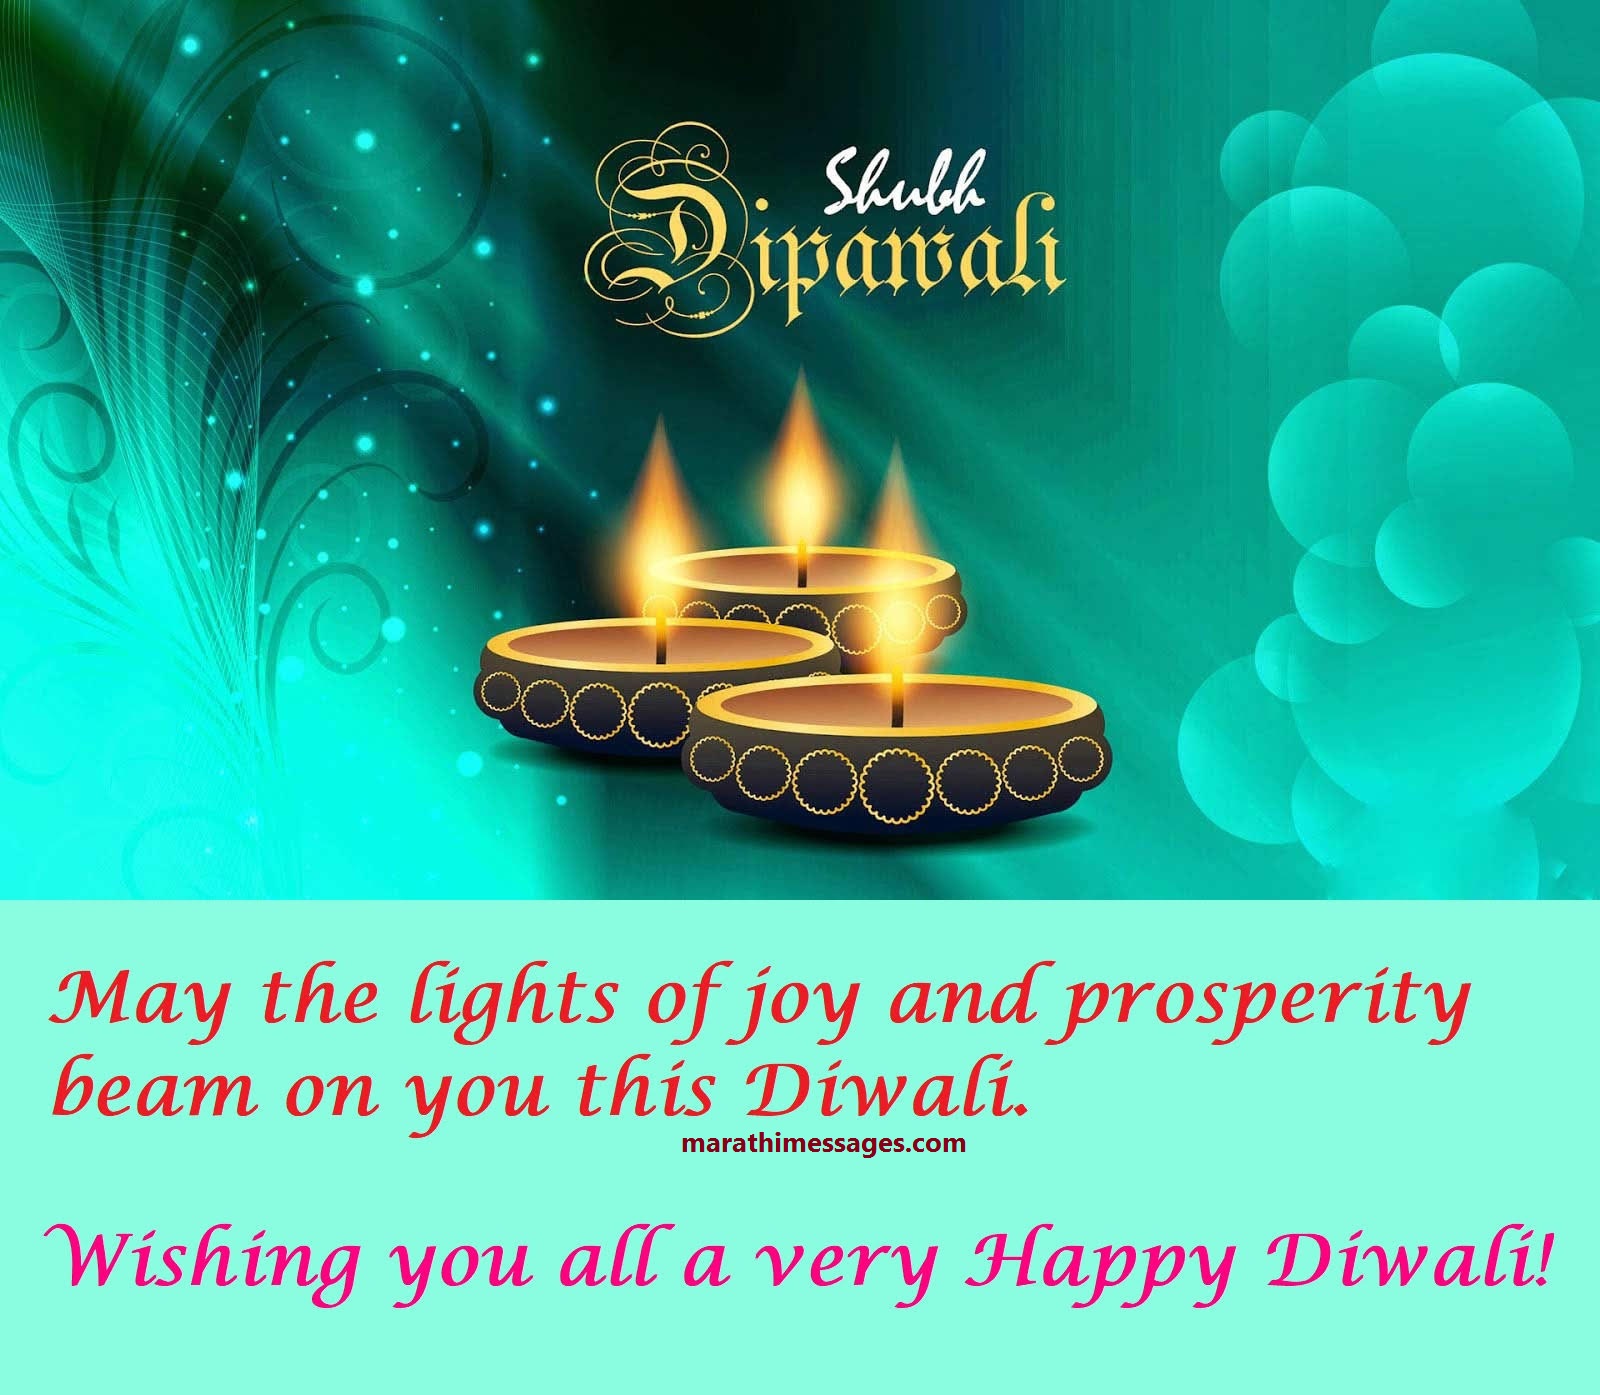 Shubh Diwali messages